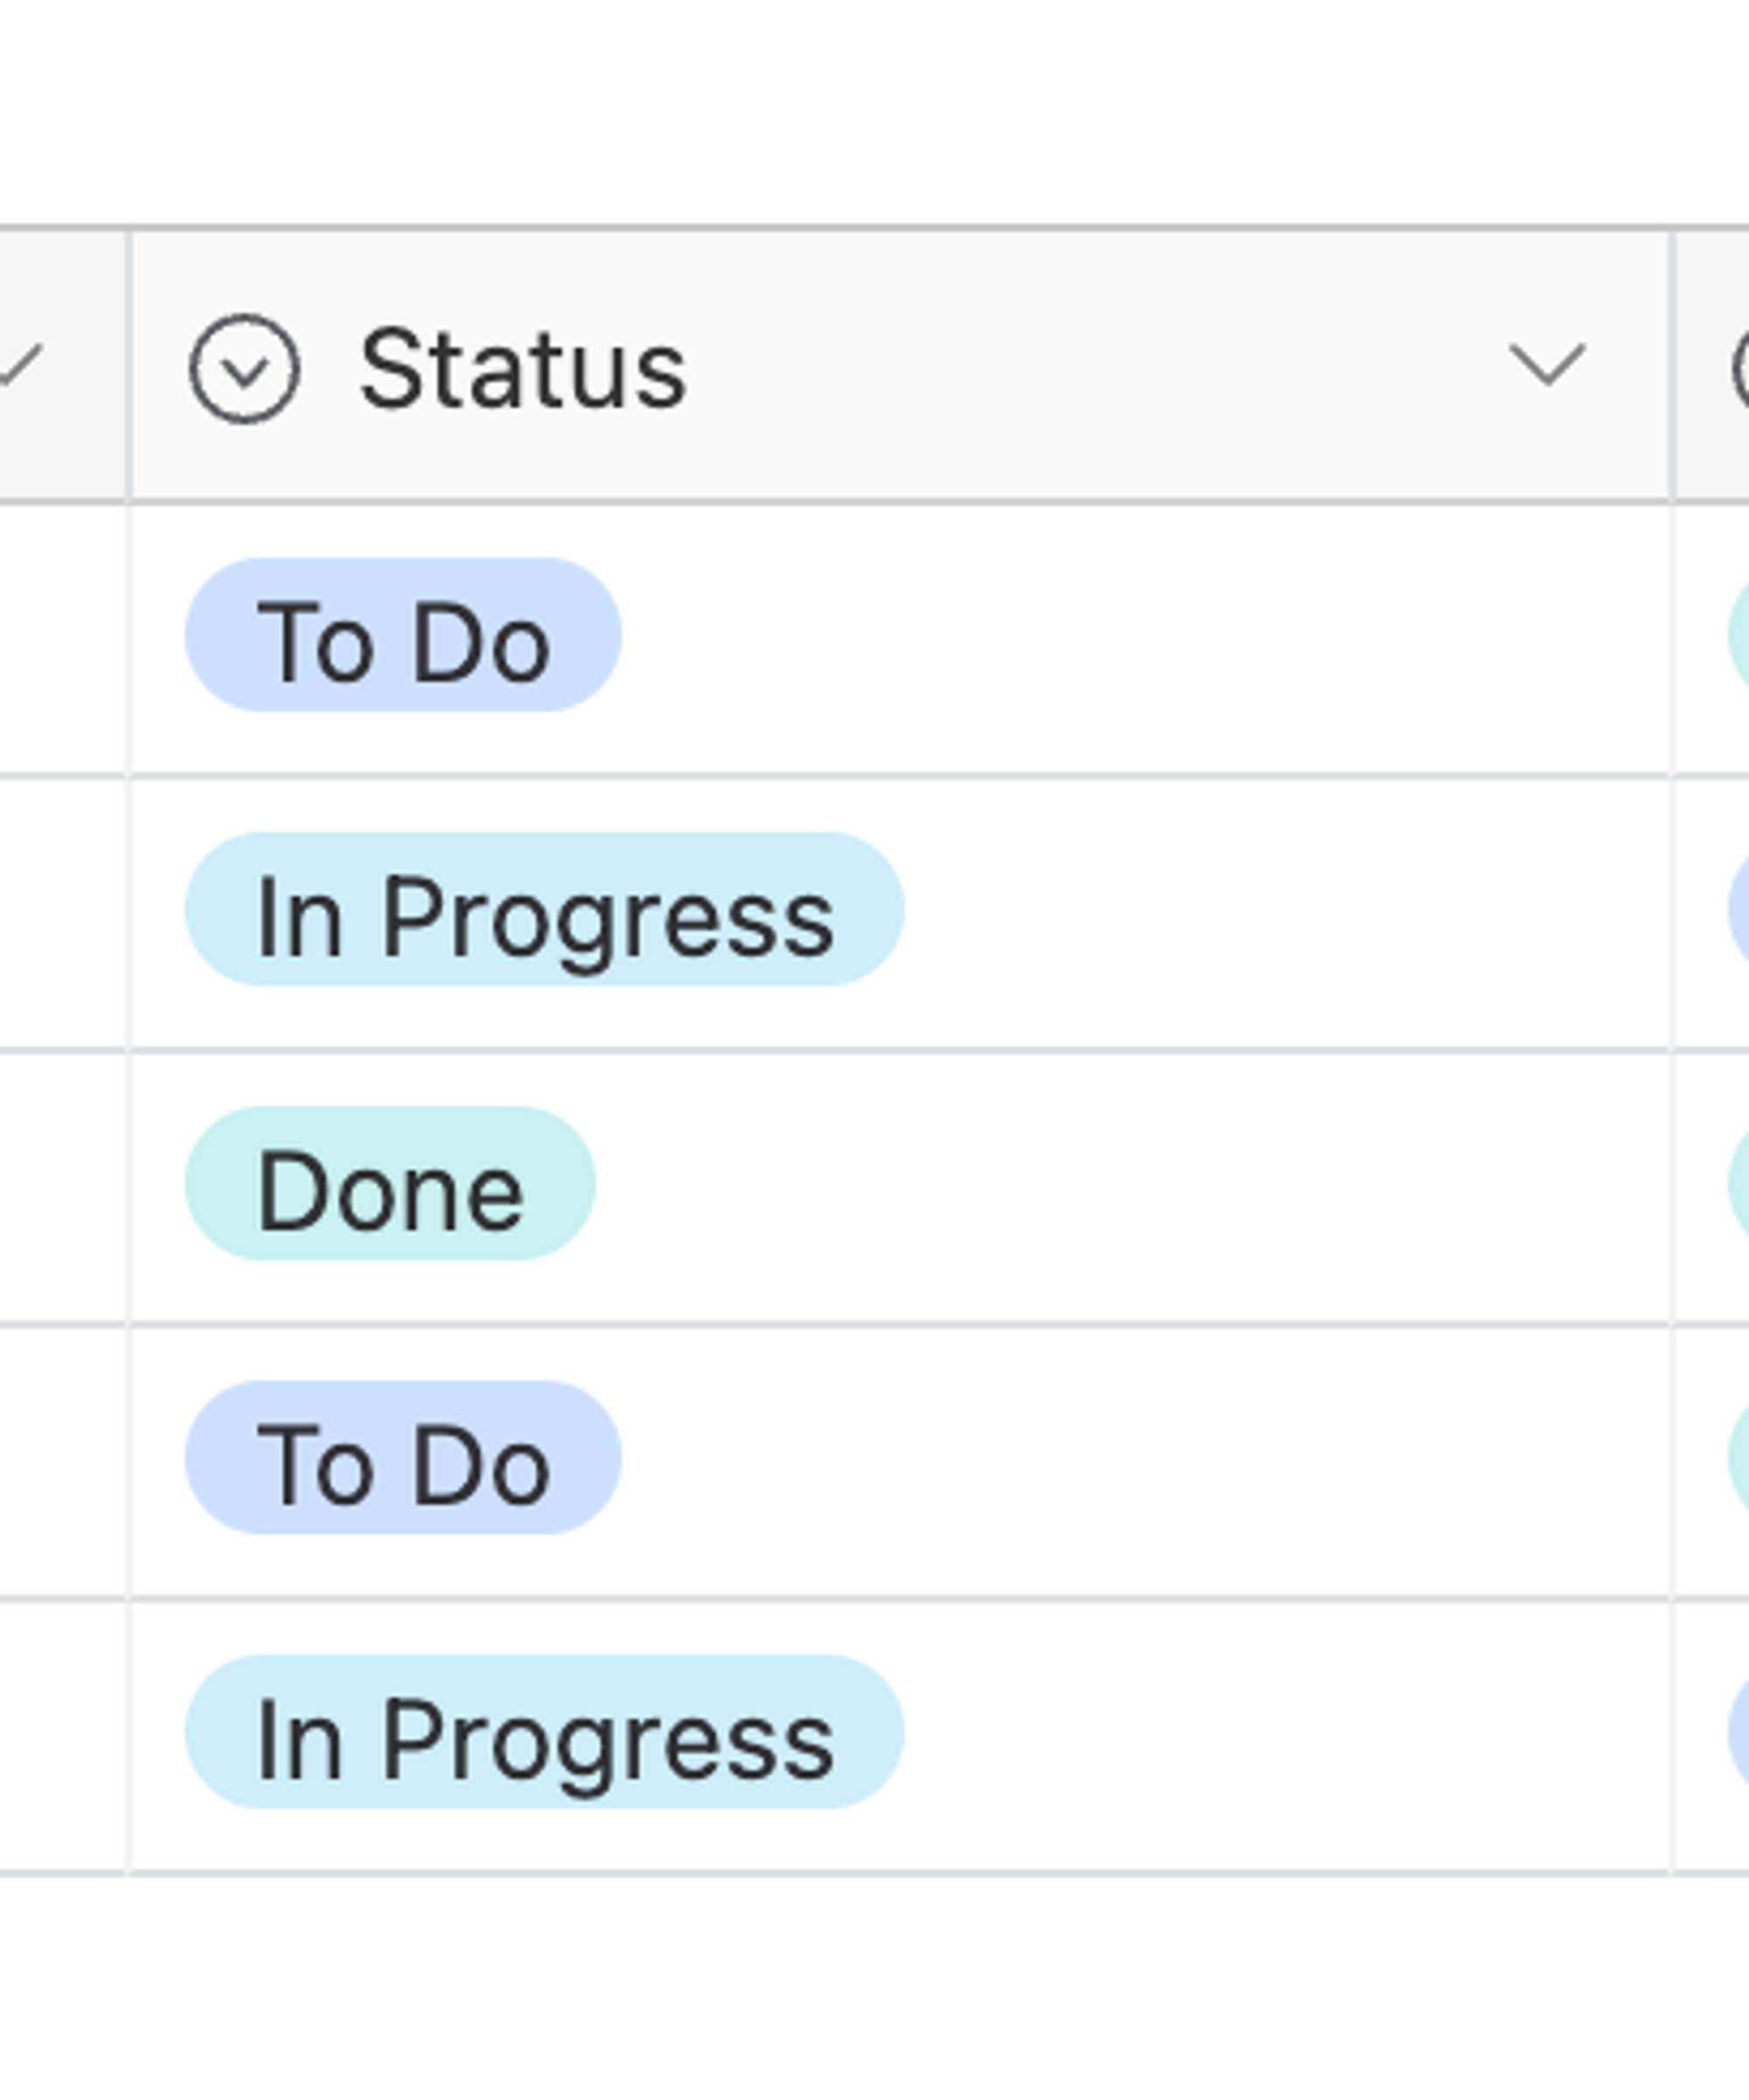 “Status” field on Airtable